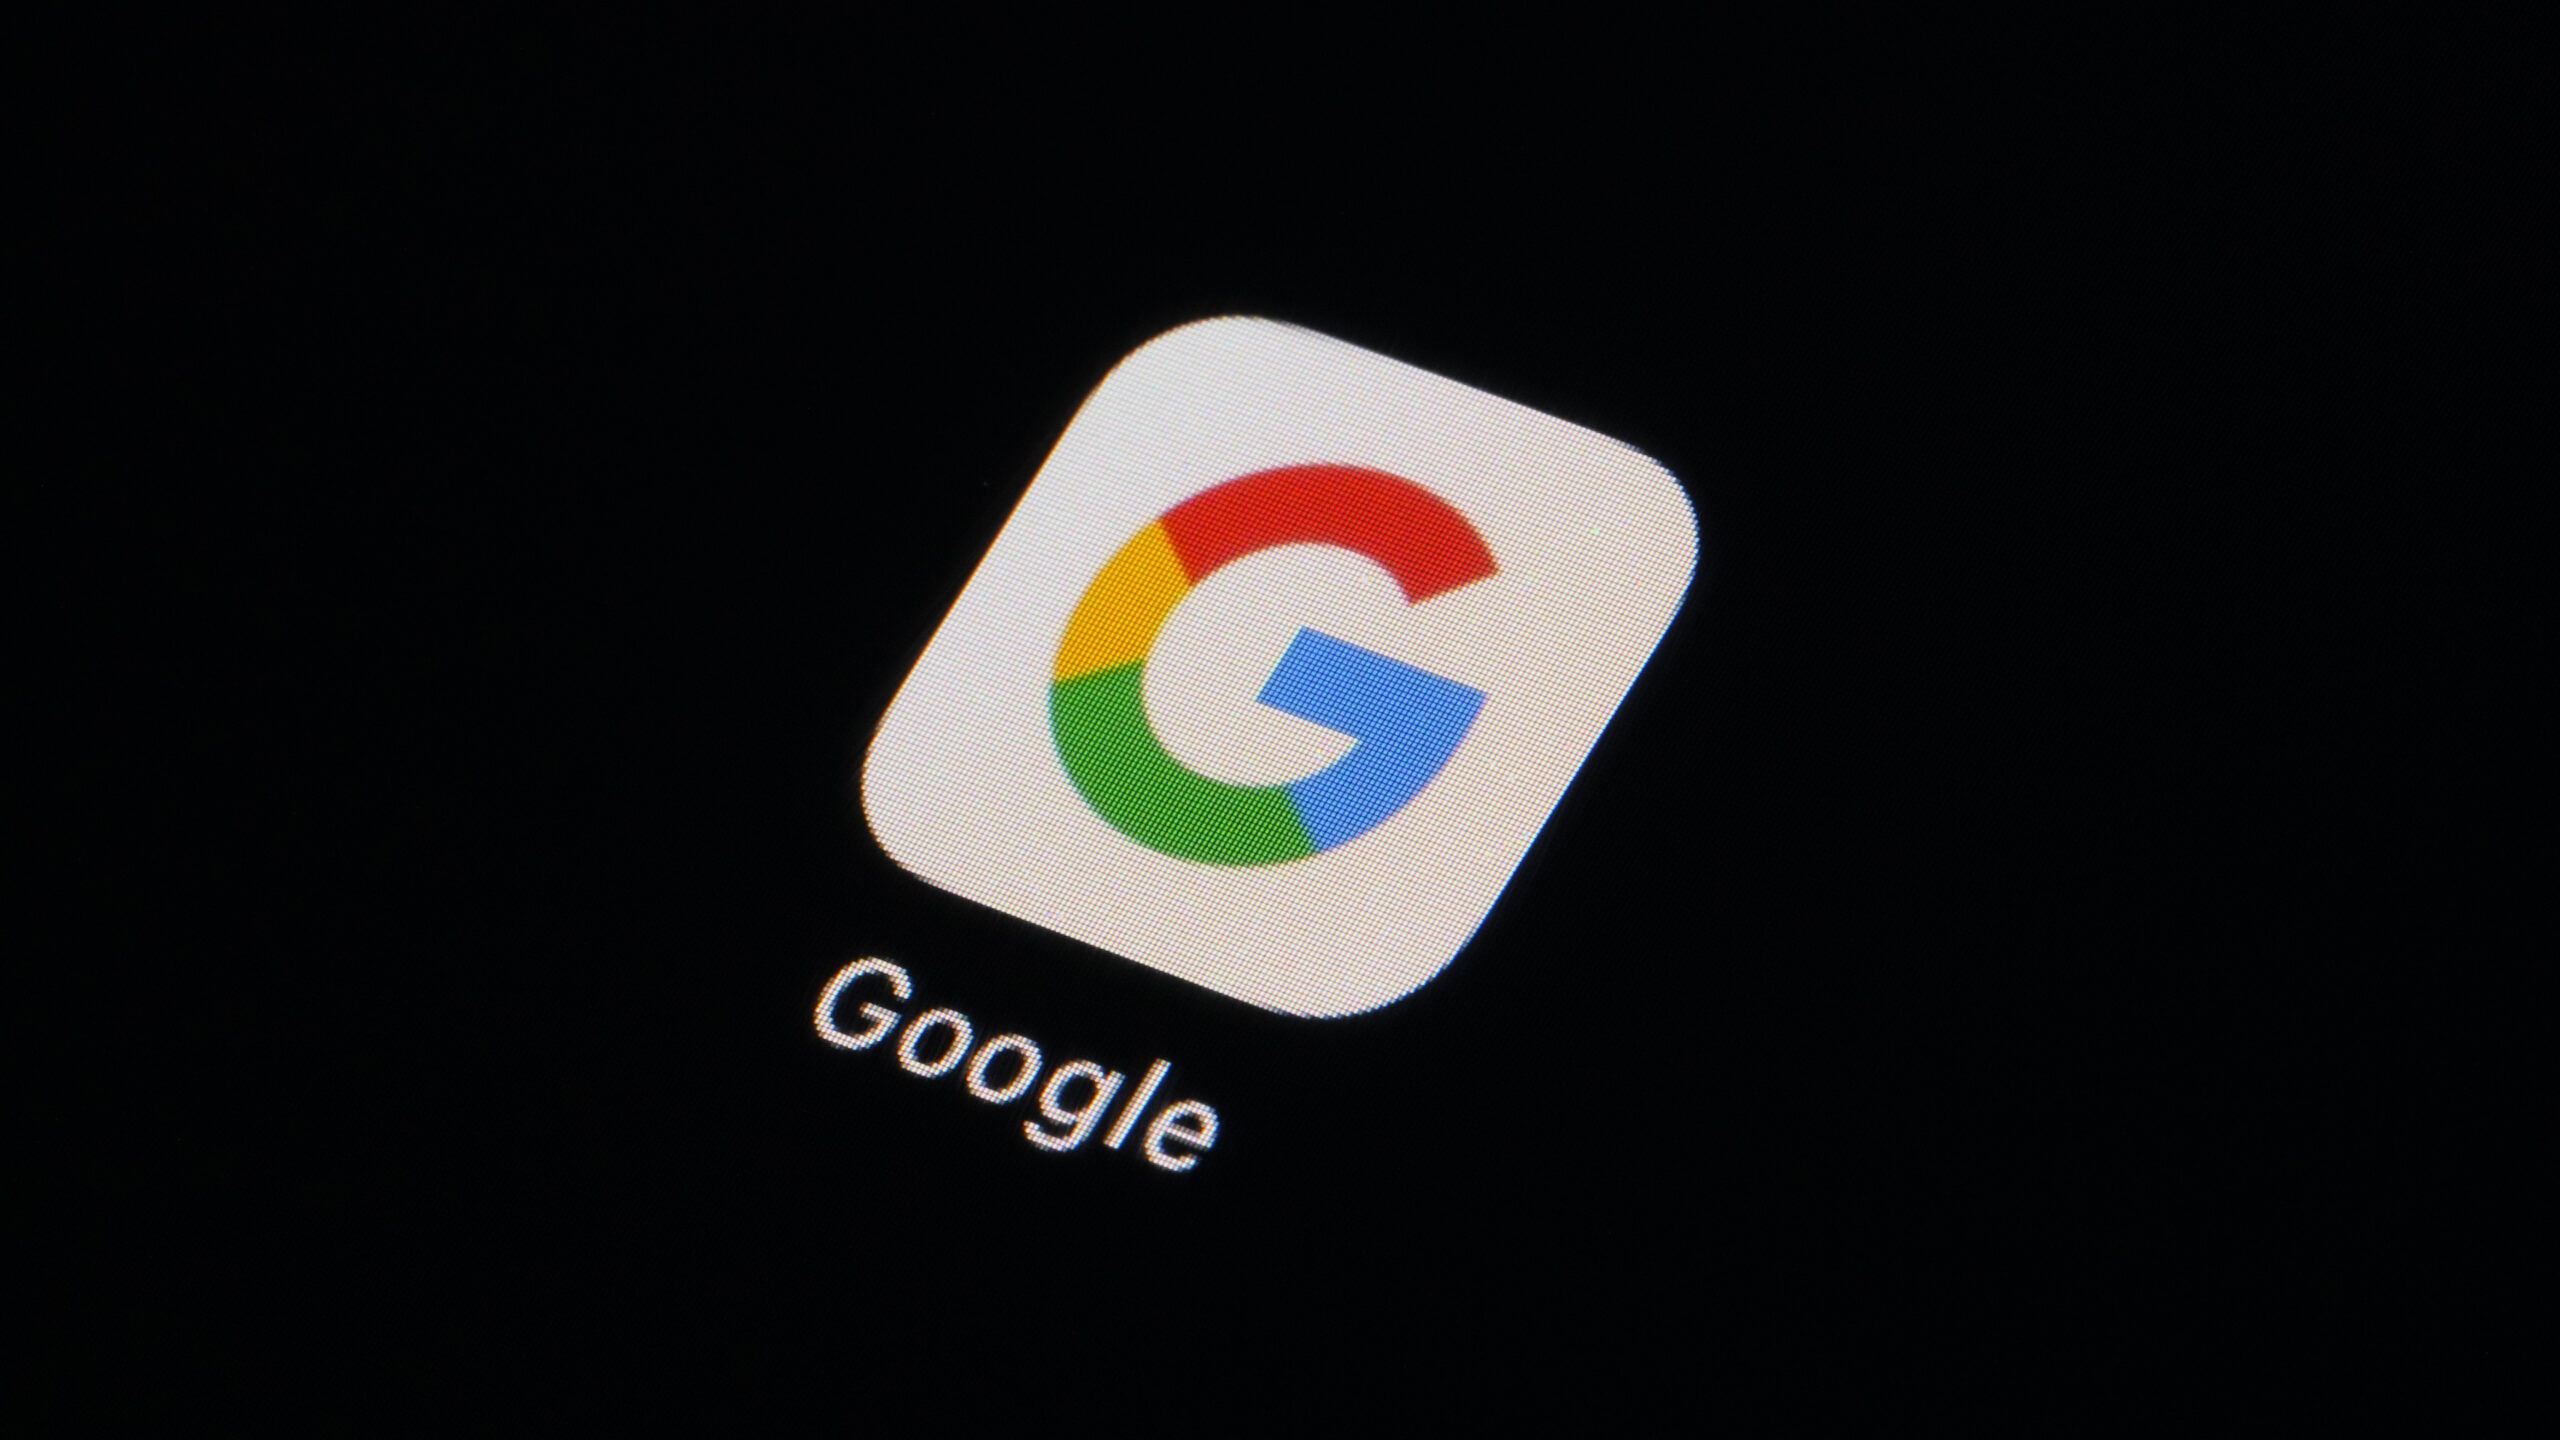 Google agreed on Thursday to settle a $5 billion privacy lawsuit claiming that it continued spying on people who used